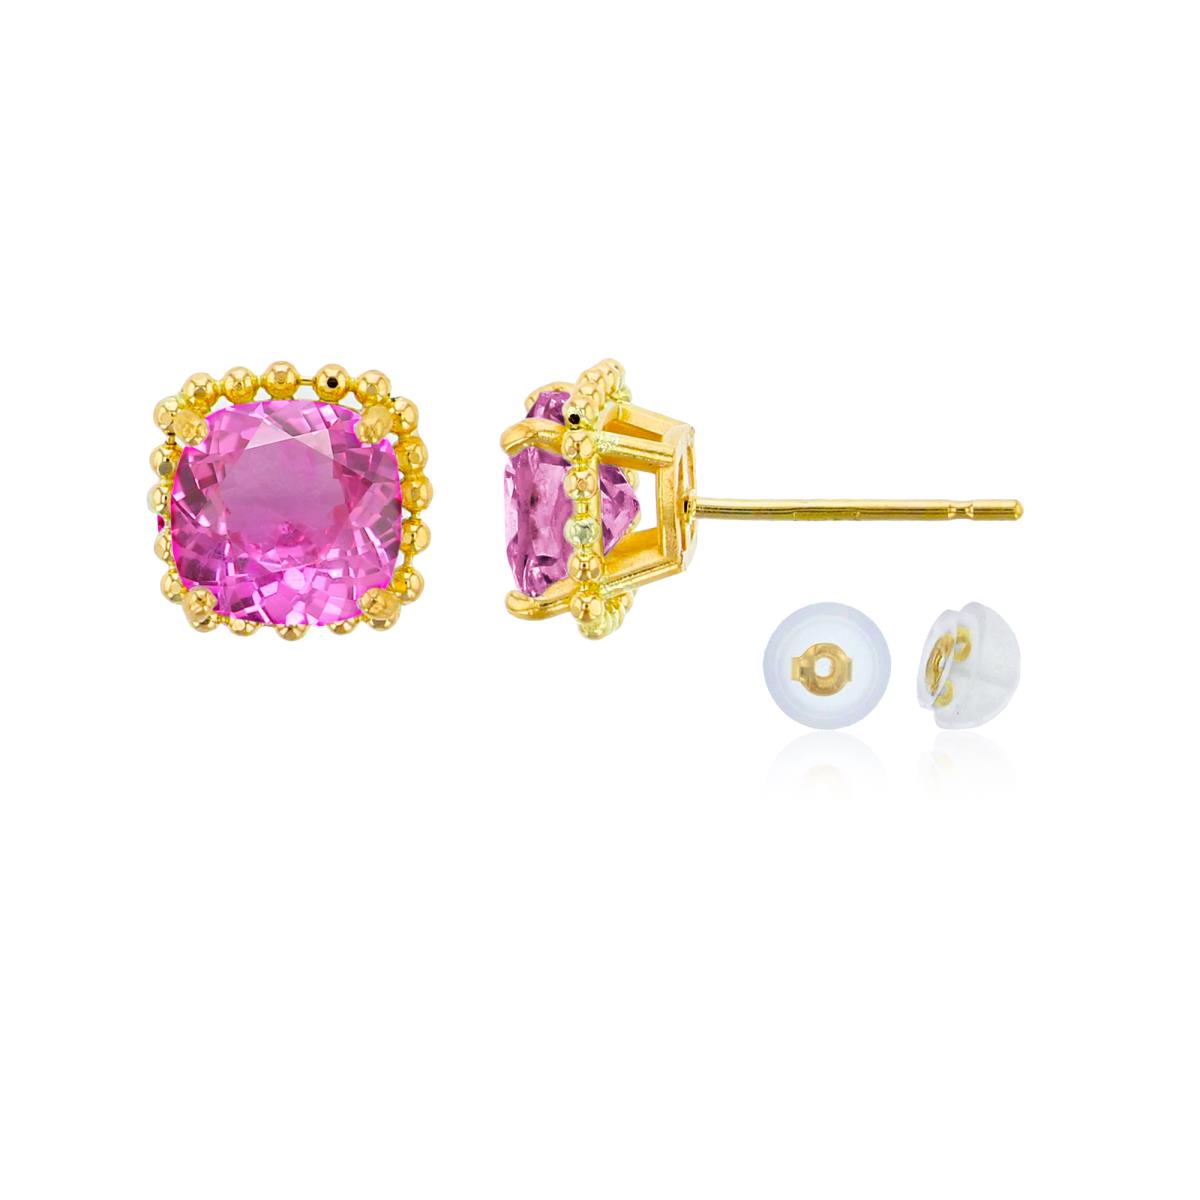 10K Yellow Gold 6x6mm Cushion Cut Created Pink Sapphire Bead Frame Stud Earring with Silicone Back